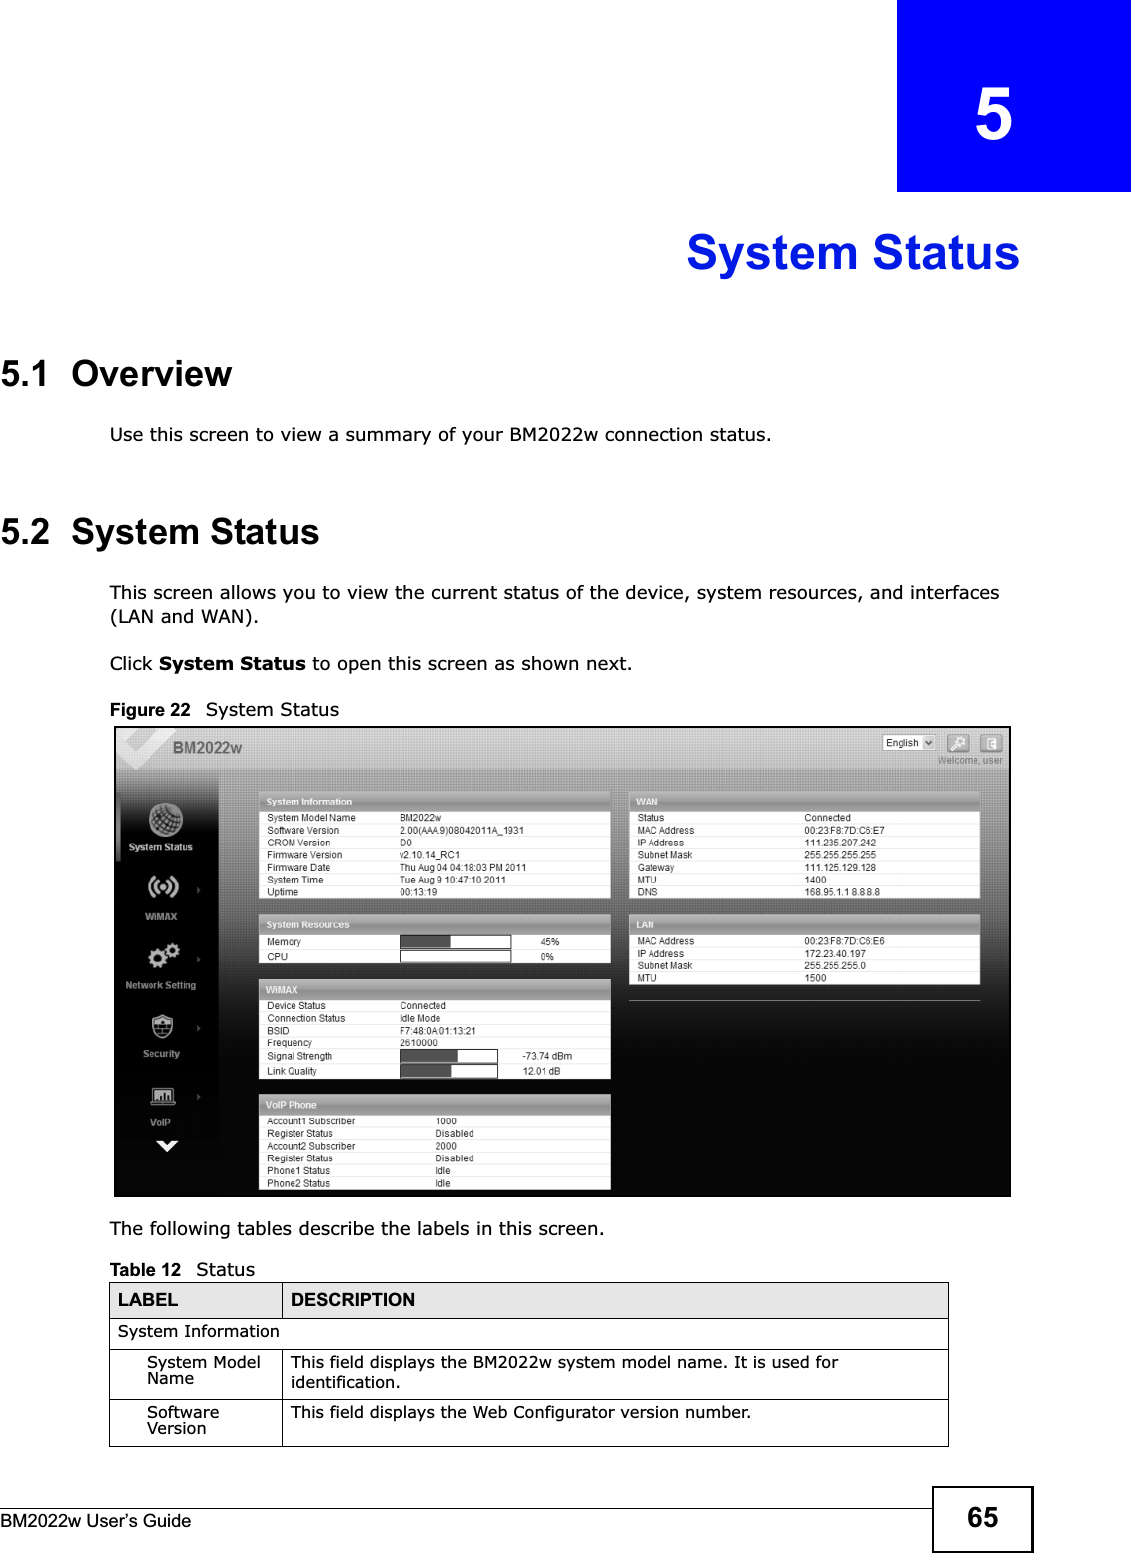 BM2022w User’s Guide 65CHAPTER   5System Status5.1  OverviewUse this screen to view a summary of your BM2022w connection status.5.2  System StatusThis screen allows you to view the current status of the device, system resources, and interfaces (LAN and WAN).Click System Status to open this screen as shown next.Figure 22   System StatusThe following tables describe the labels in this screen. Table 12   StatusLABEL DESCRIPTIONSystem InformationSystem Model Name This field displays the BM2022w system model name. It is used for identification. Software Version This field displays the Web Configurator version number.